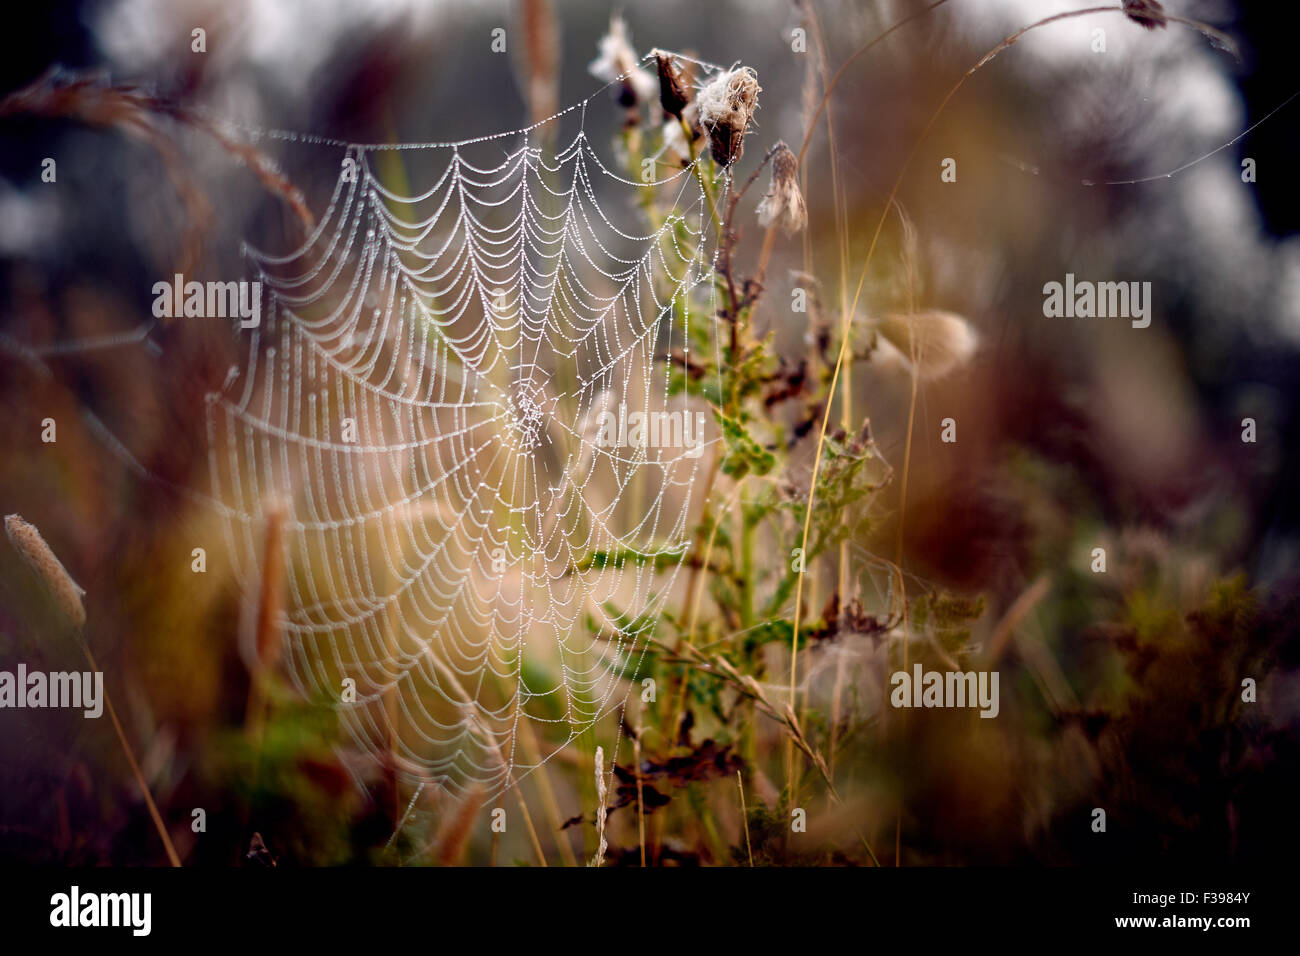 Spiderweb with dew drops on, against grasses Stock Photo